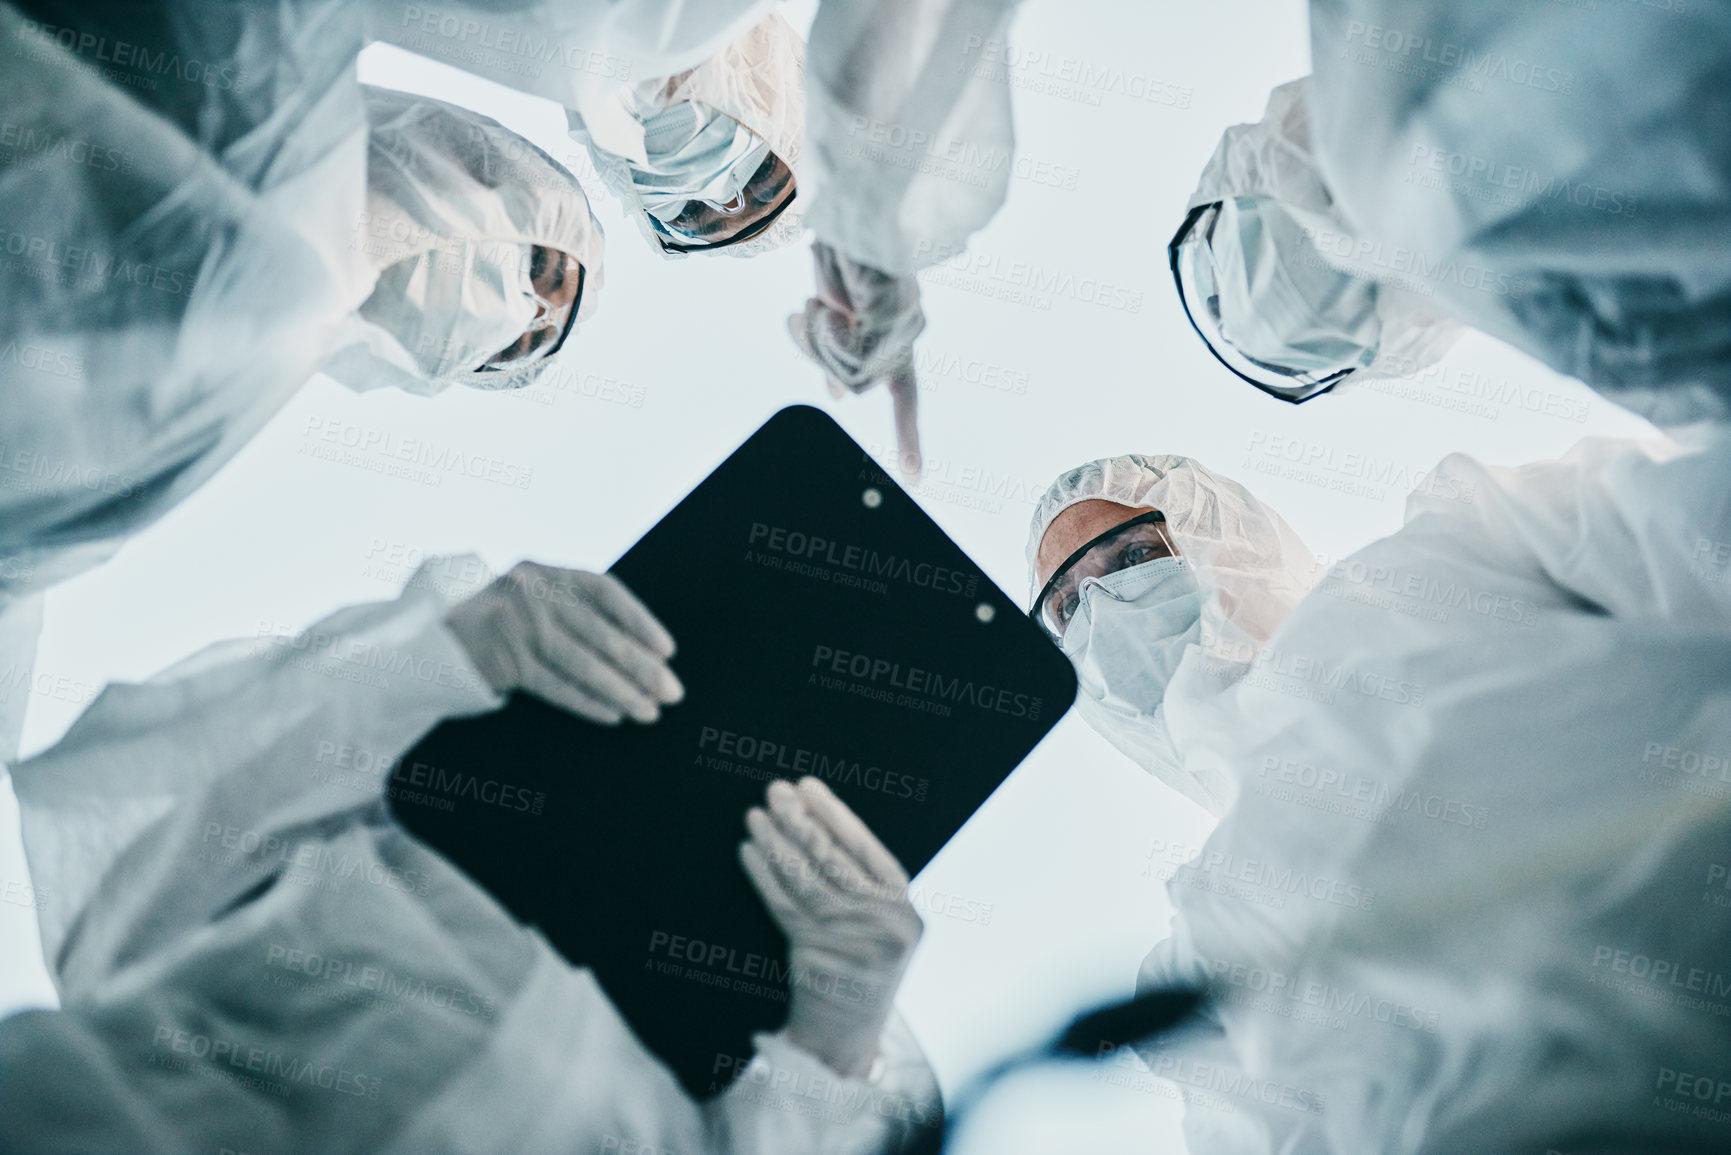 Buy stock photo Hazmat healthcare workers from below, working together during covid pandemic wearing face masks. Team of doctors wearing quarantine suits discussing medical lab results of the virus spread 